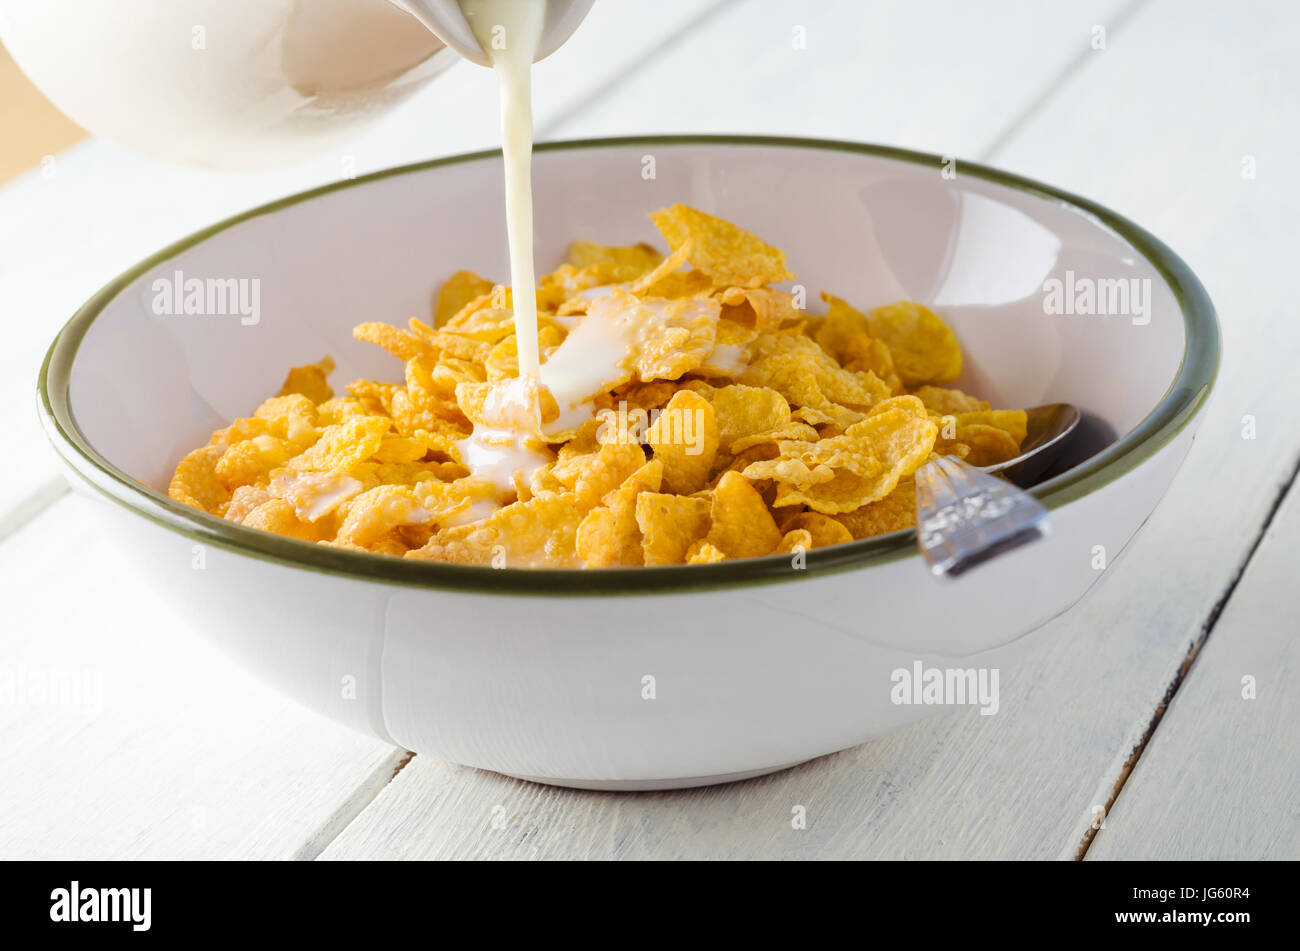 https://c8.alamy.com/comp/JG60R4/milk-pouring-from-a-jug-into-a-bowl-of-breakfast-cornflakes-on-a-white-JG60R4.jpg